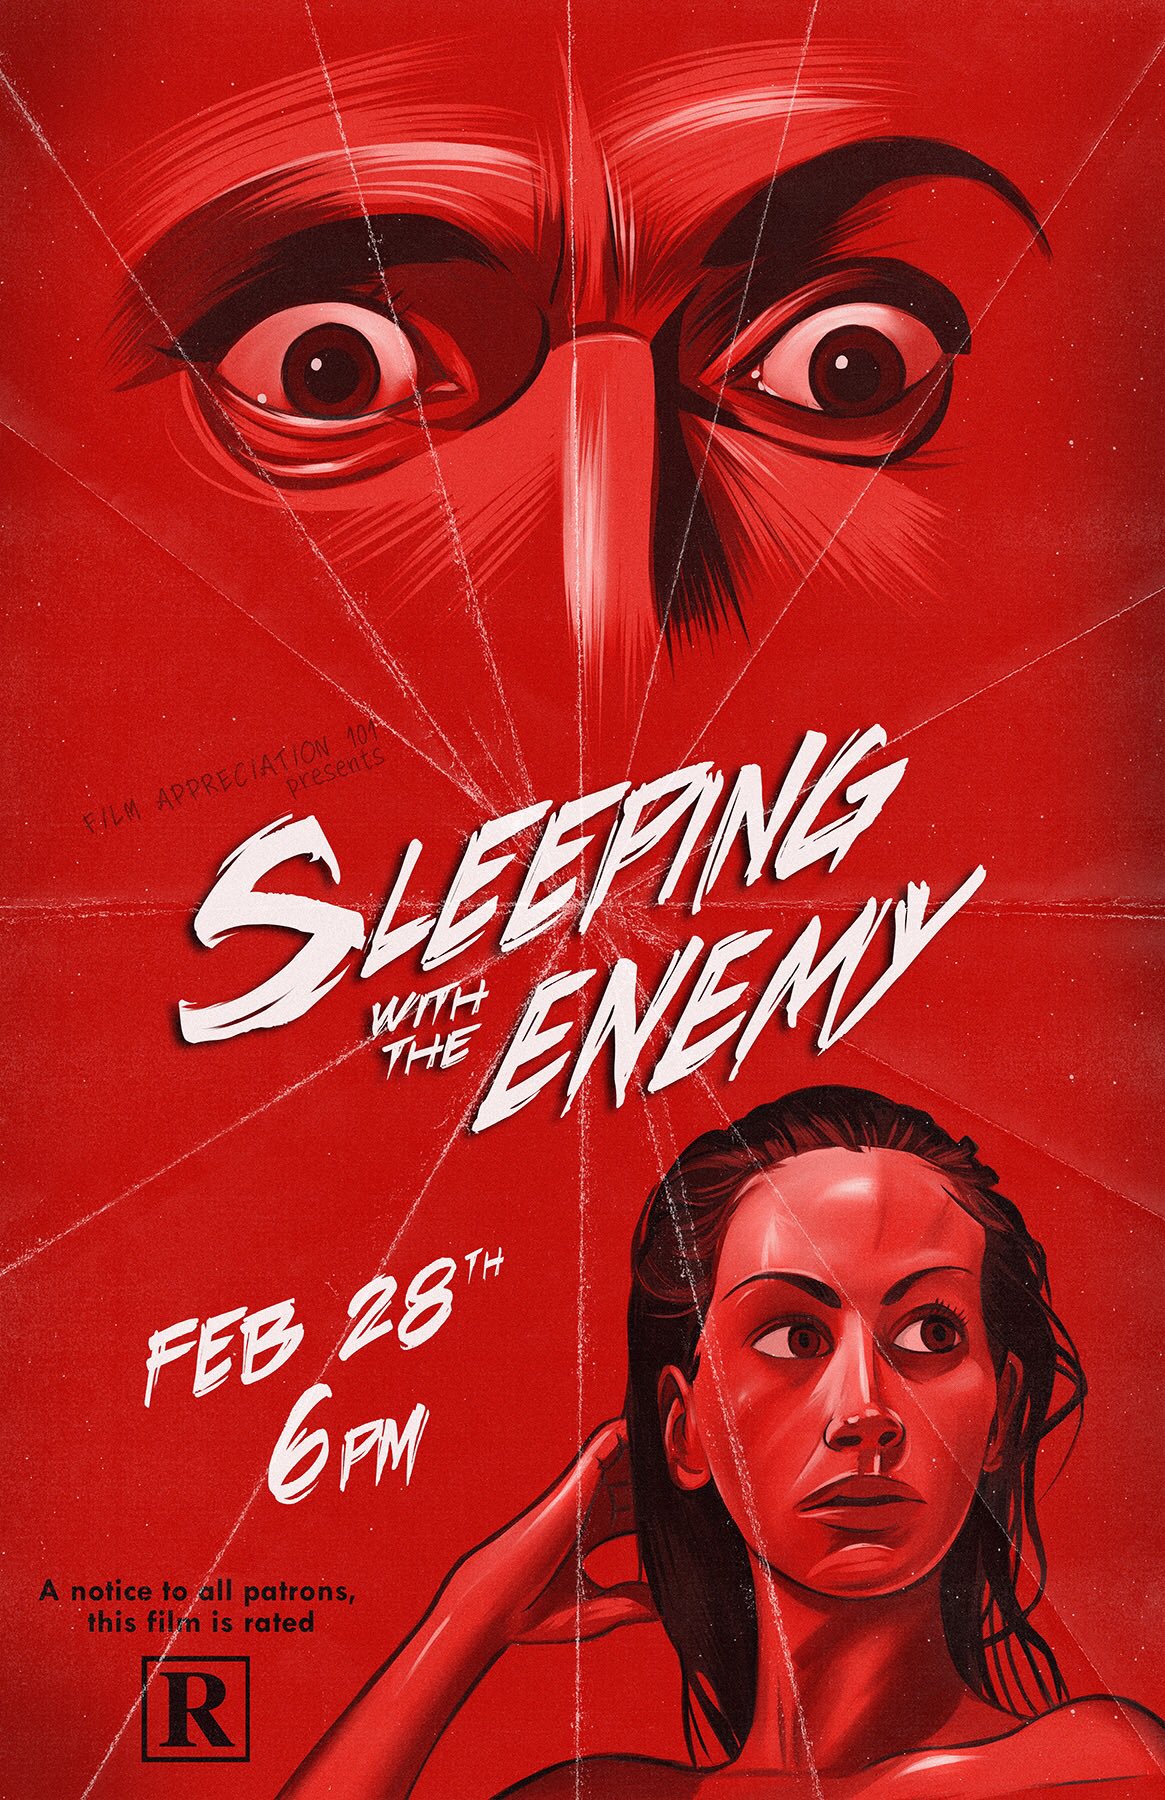 Travis Falligant on X: Coming this month to @rocopublib via the Film  Appreciation 101 series: the classic Julia Roberts thriller Sleeping with  the Enemy!!!  / X